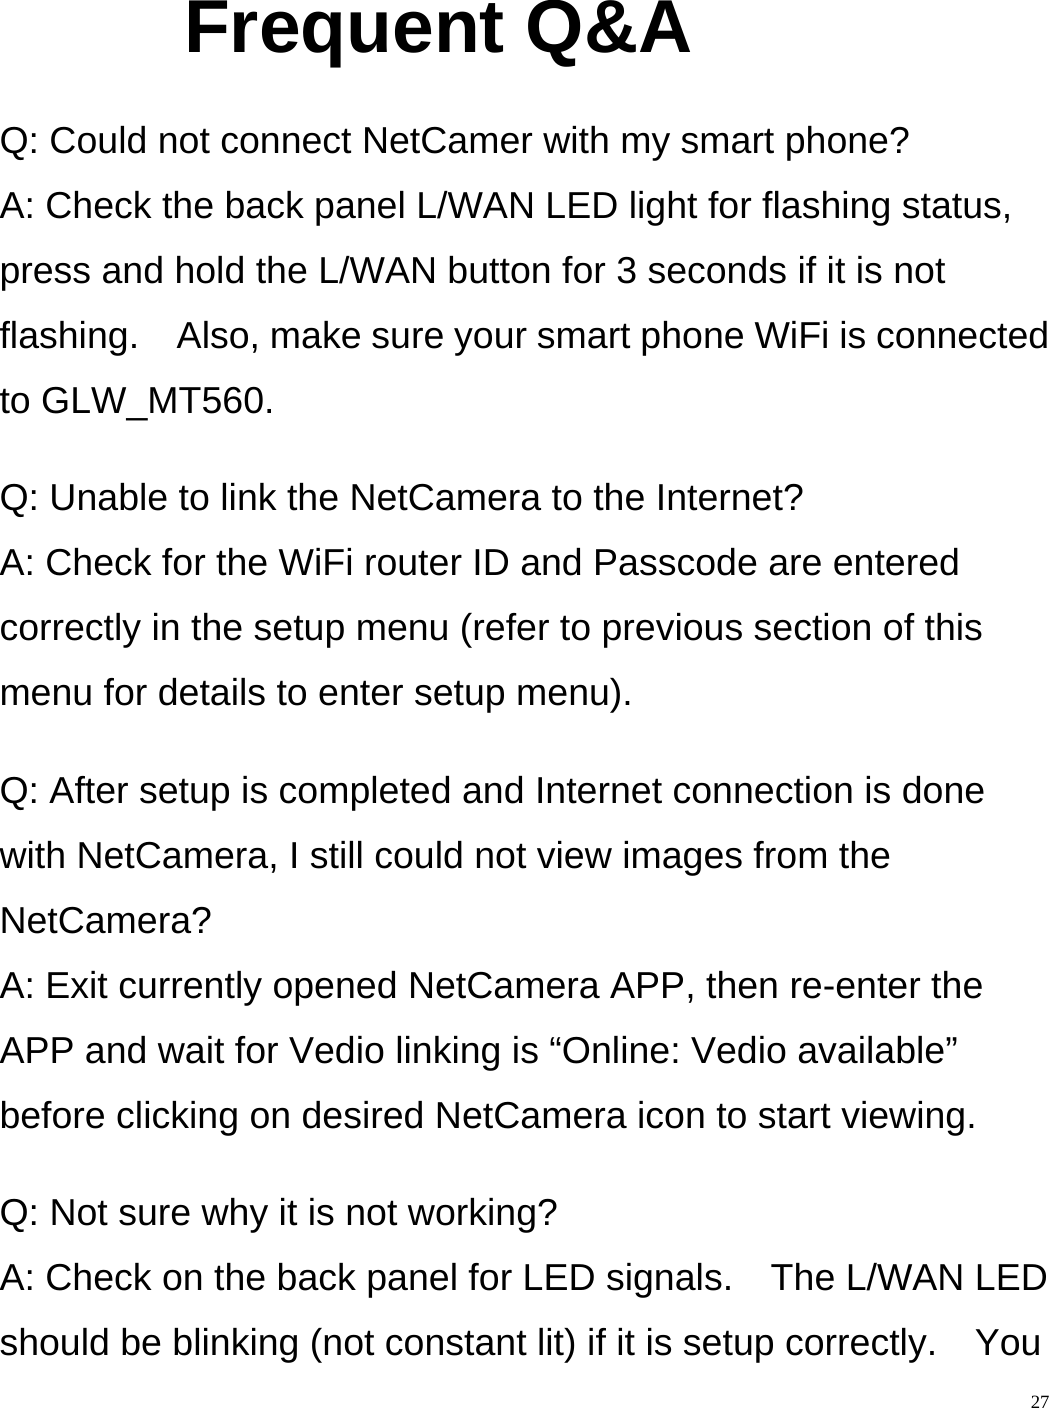    27 Frequent Q&amp;A  Q: Could not connect NetCamer with my smart phone? A: Check the back panel L/WAN LED light for flashing status, press and hold the L/WAN button for 3 seconds if it is not flashing.    Also, make sure your smart phone WiFi is connected to GLW_MT560.  Q: Unable to link the NetCamera to the Internet? A: Check for the WiFi router ID and Passcode are entered correctly in the setup menu (refer to previous section of this menu for details to enter setup menu).  Q: After setup is completed and Internet connection is done with NetCamera, I still could not view images from the NetCamera? A: Exit currently opened NetCamera APP, then re-enter the APP and wait for Vedio linking is “Online: Vedio available” before clicking on desired NetCamera icon to start viewing.  Q: Not sure why it is not working? A: Check on the back panel for LED signals.    The L/WAN LED should be blinking (not constant lit) if it is setup correctly.    You 